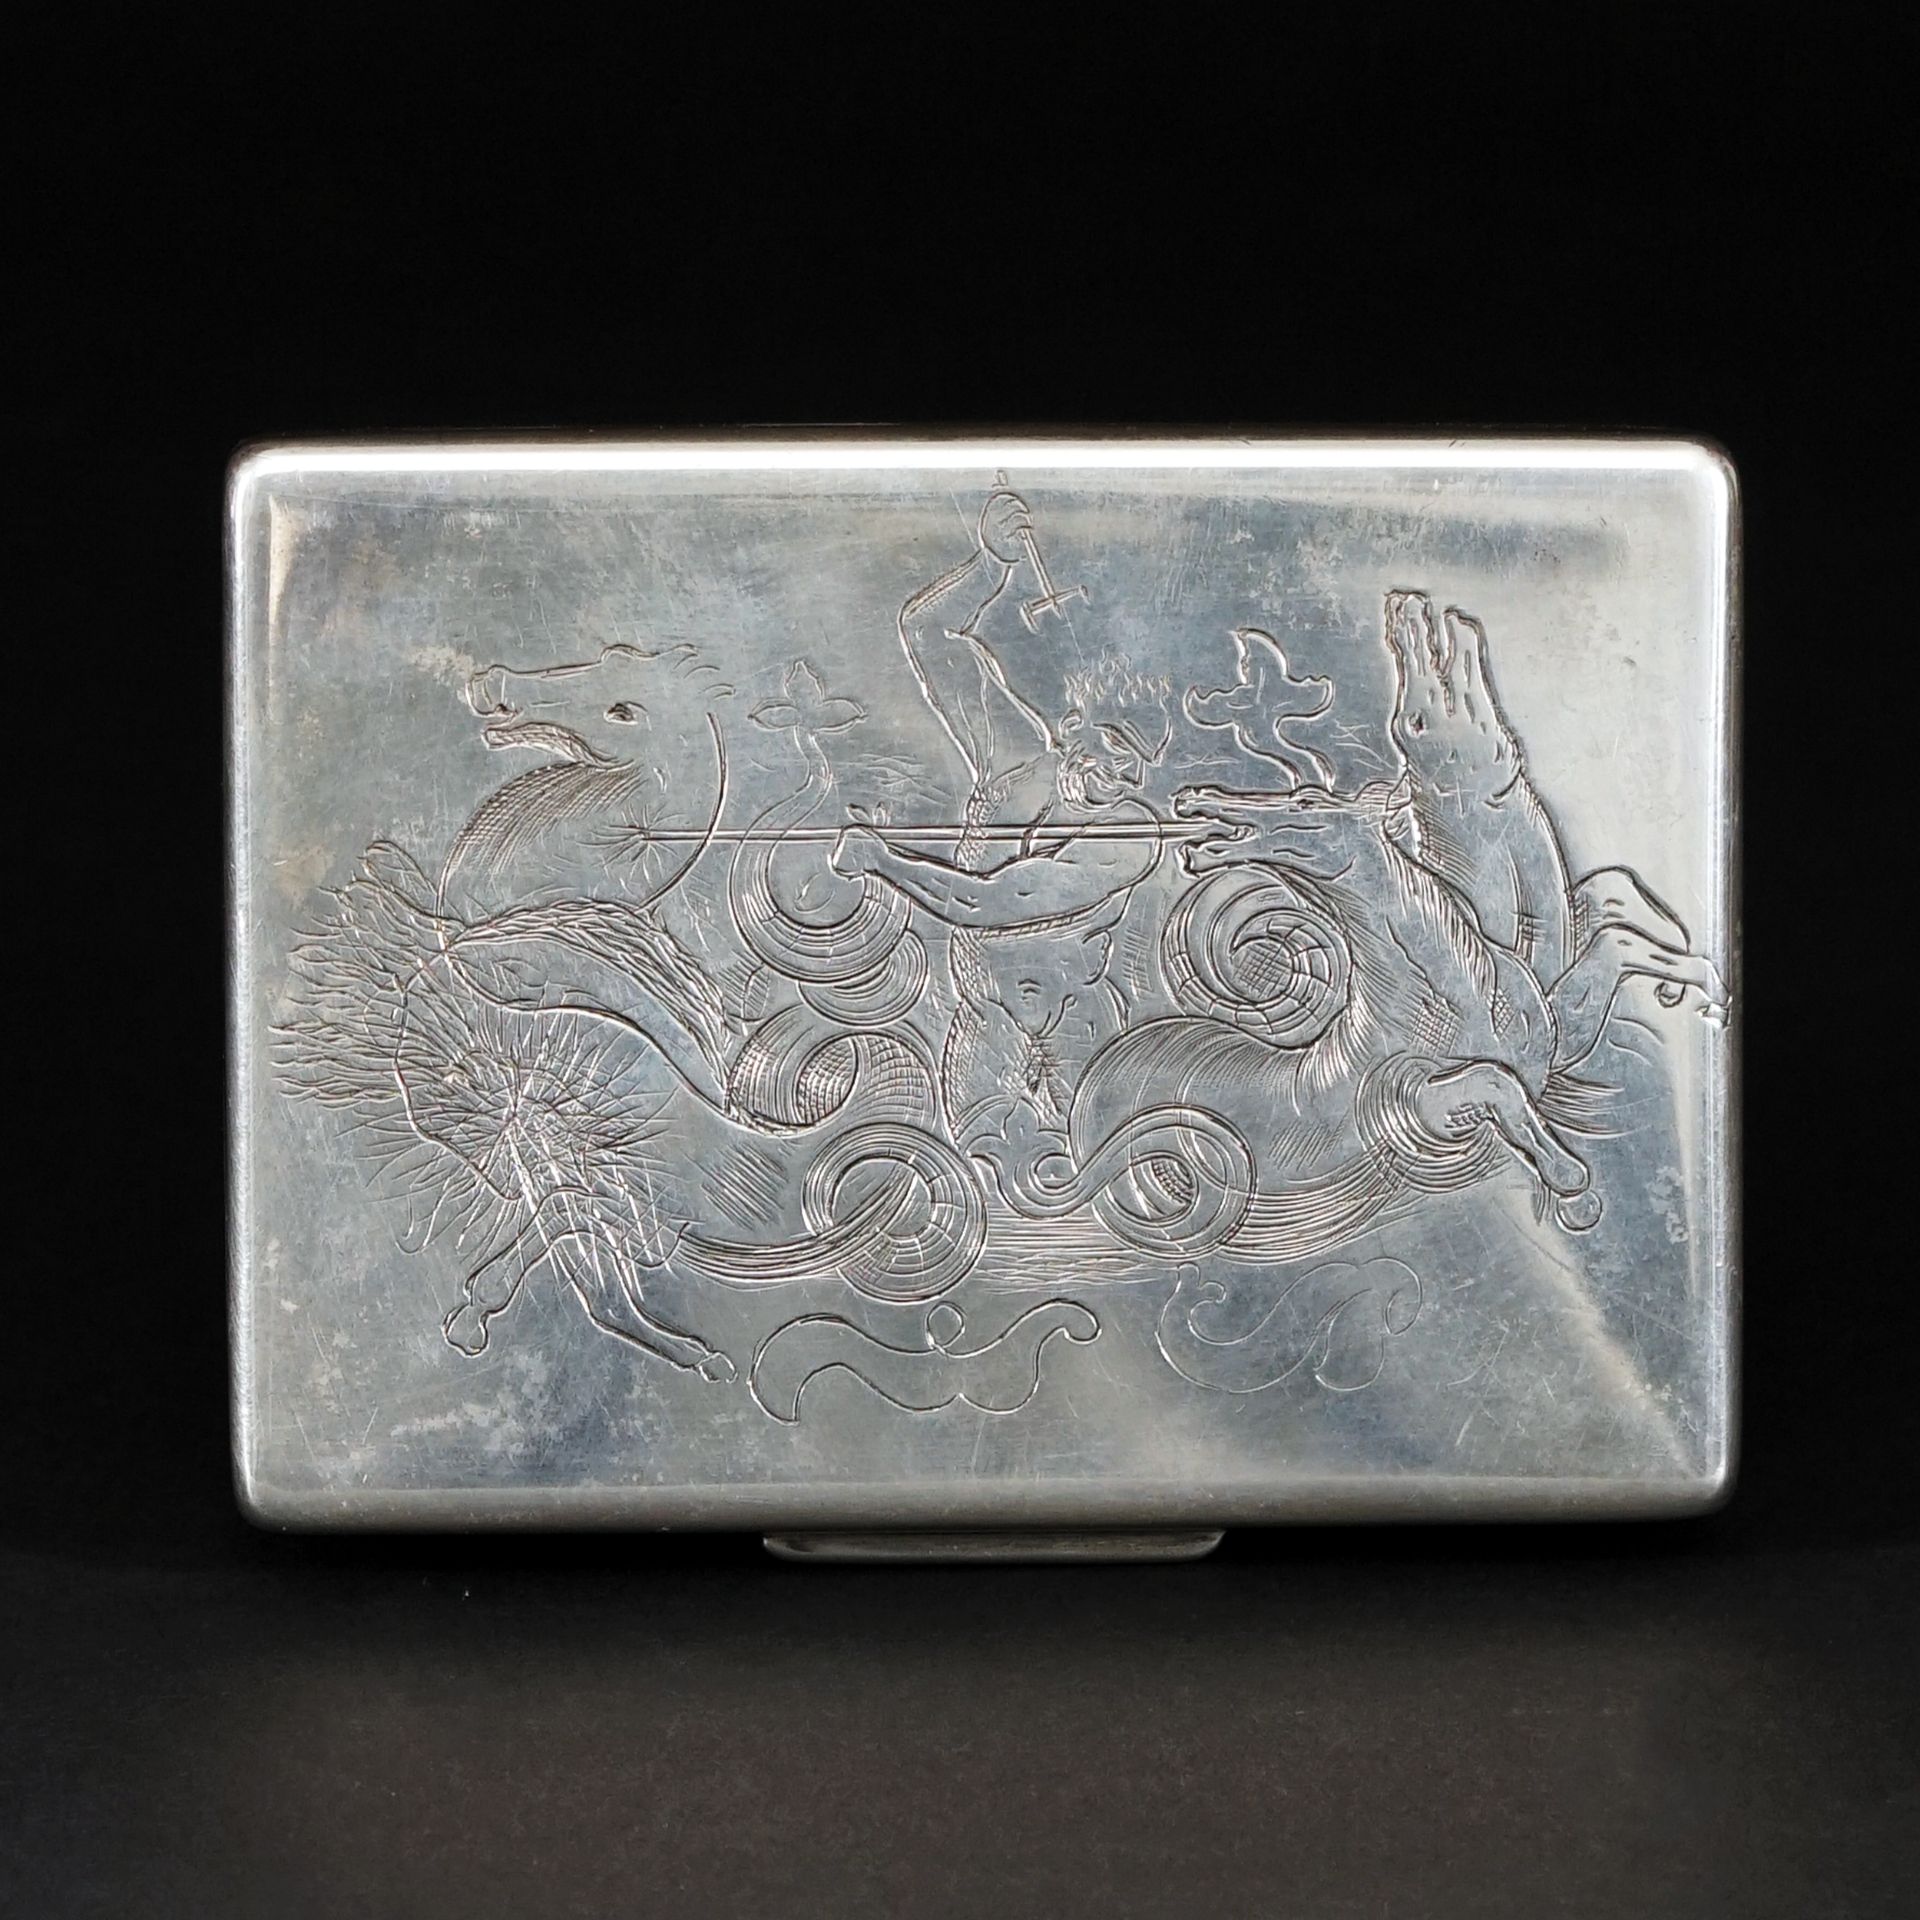 An Italian engraved sterling silver rectangular box, Florence, Gino Piani, 1935-1945 8,5by11cm.,